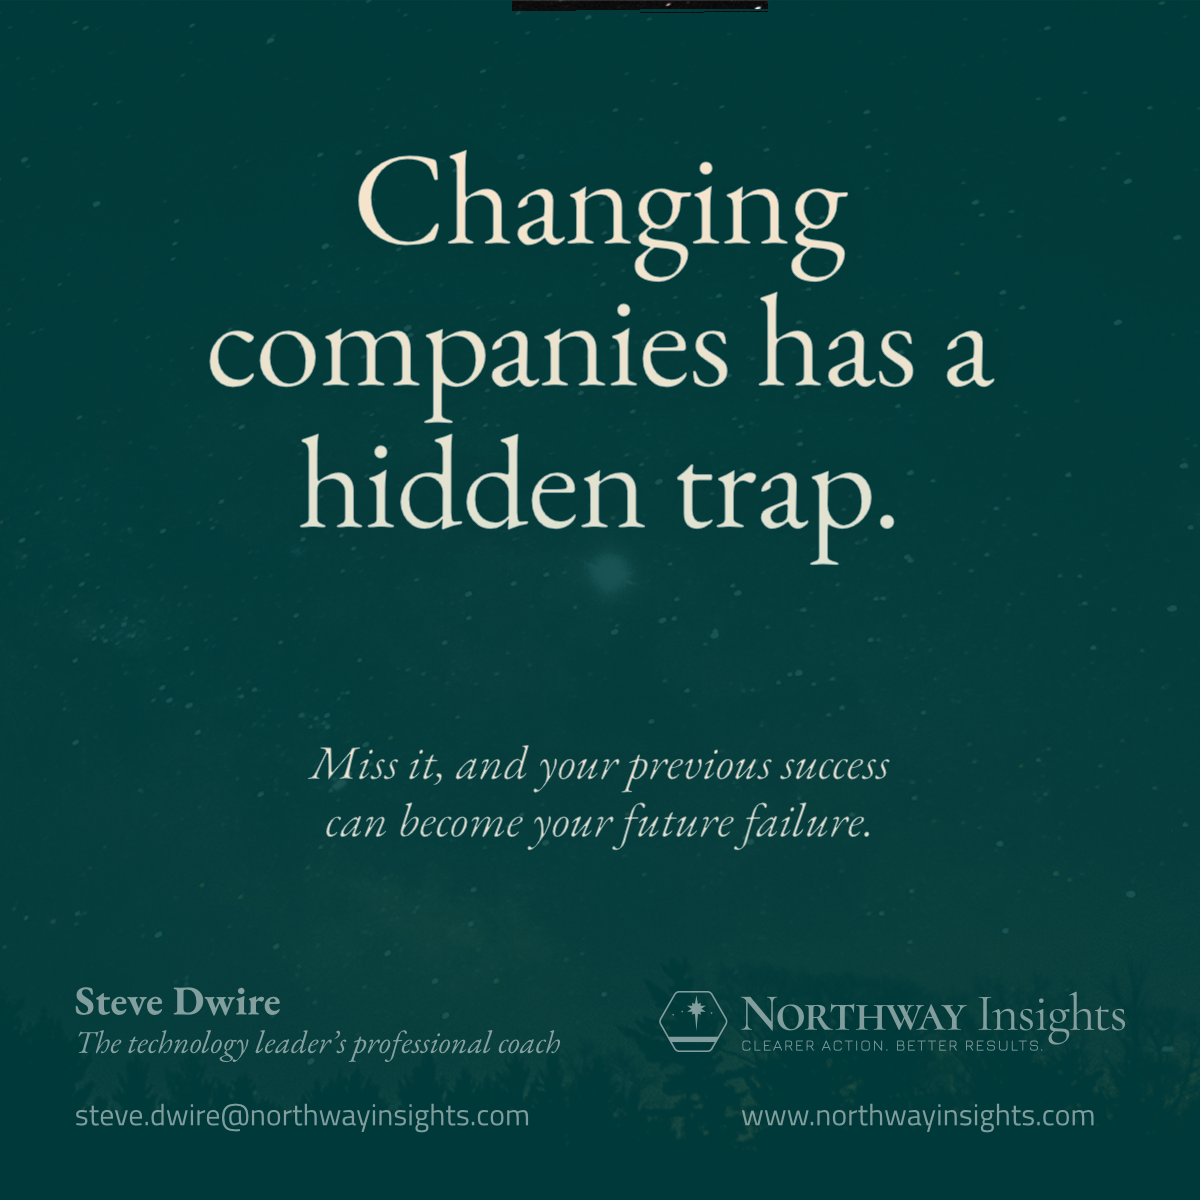 Changing companies has a hidden trap